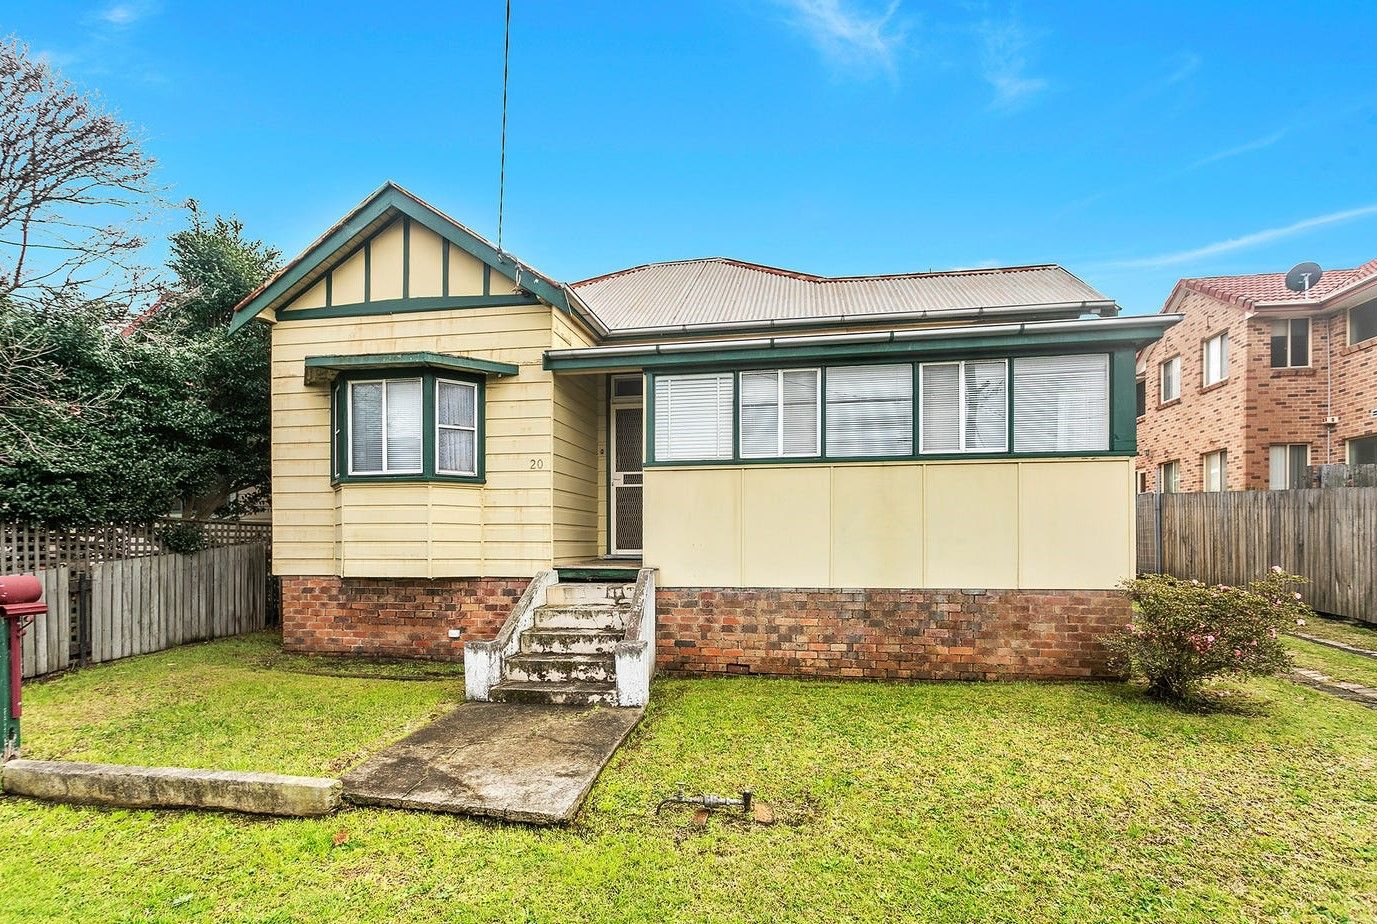 4 bedrooms House in 20 Campbell Street WOLLONGONG NSW, 2500